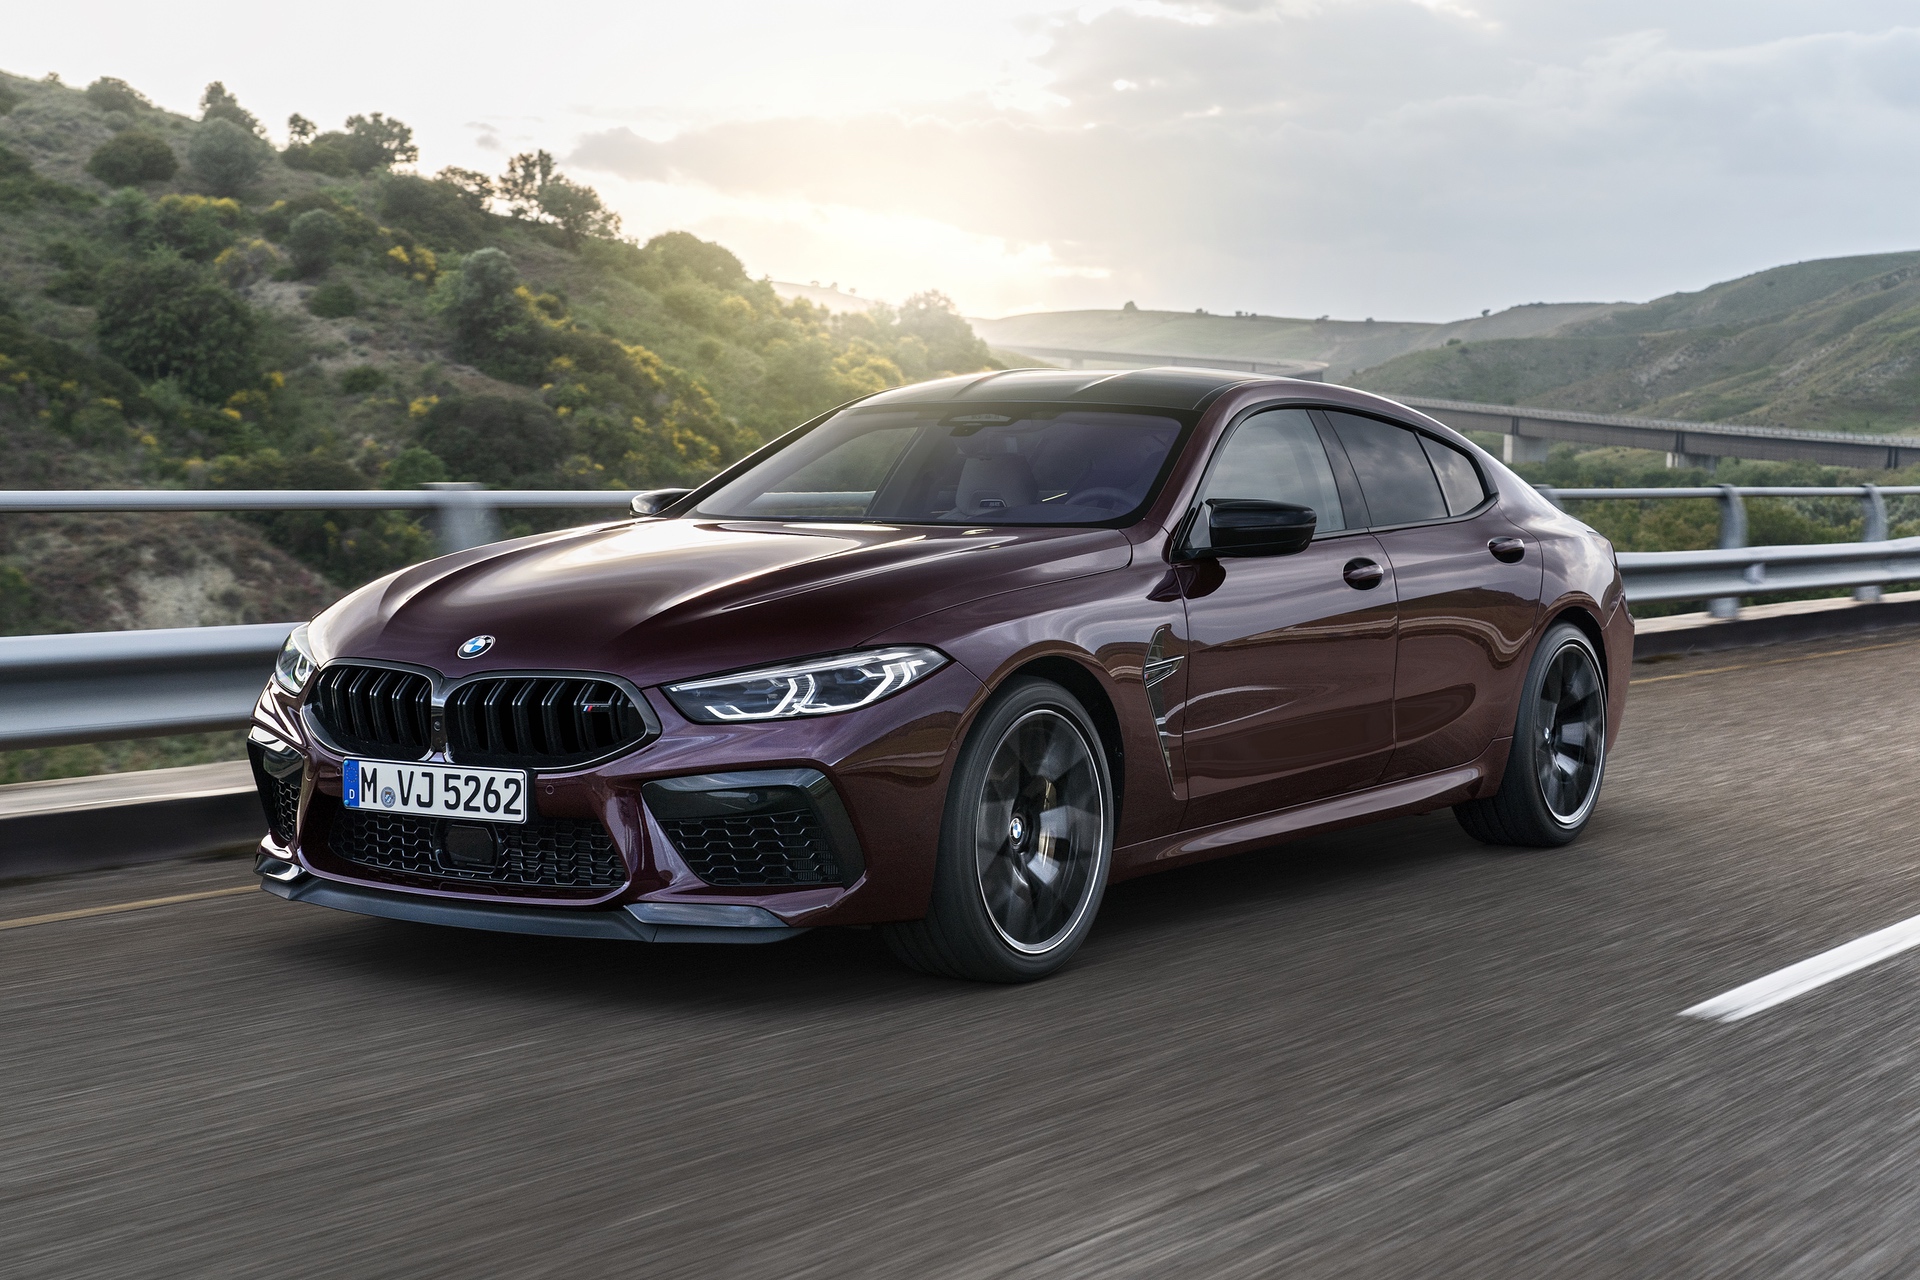 BMW M8 Gran Coupe Revealed with 625 horsepower